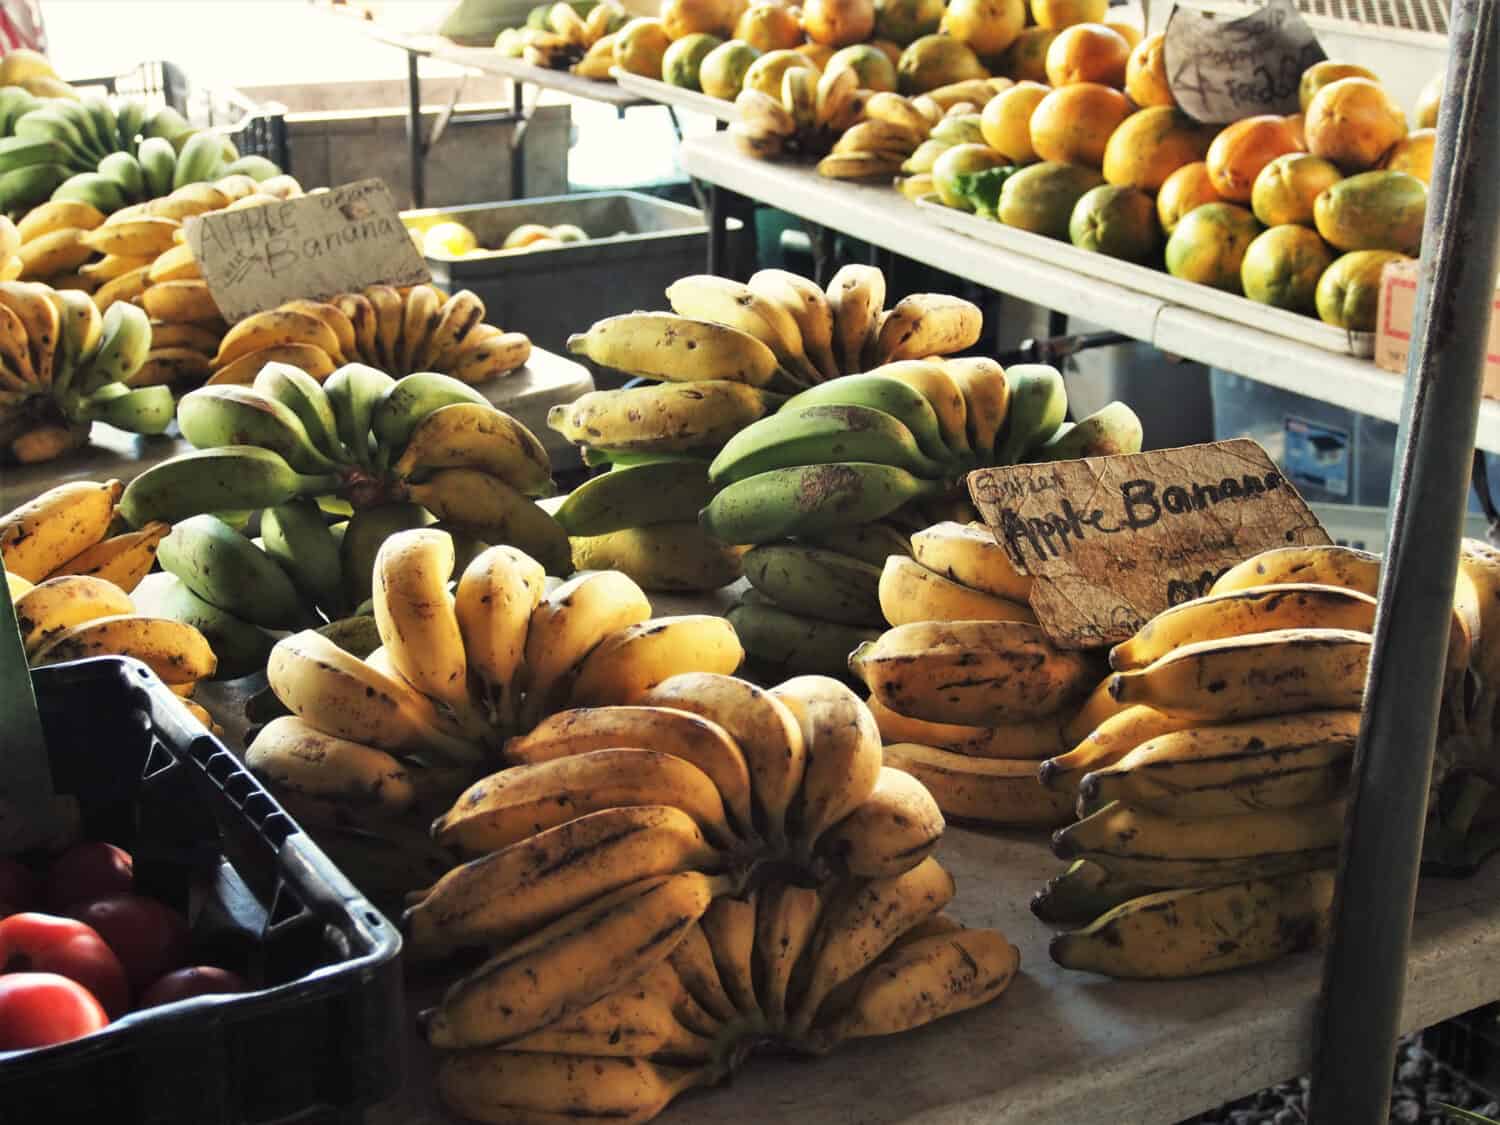 Apple Bananas with Old Cardboard Sign on Table at Farmer's Market in Hawaii